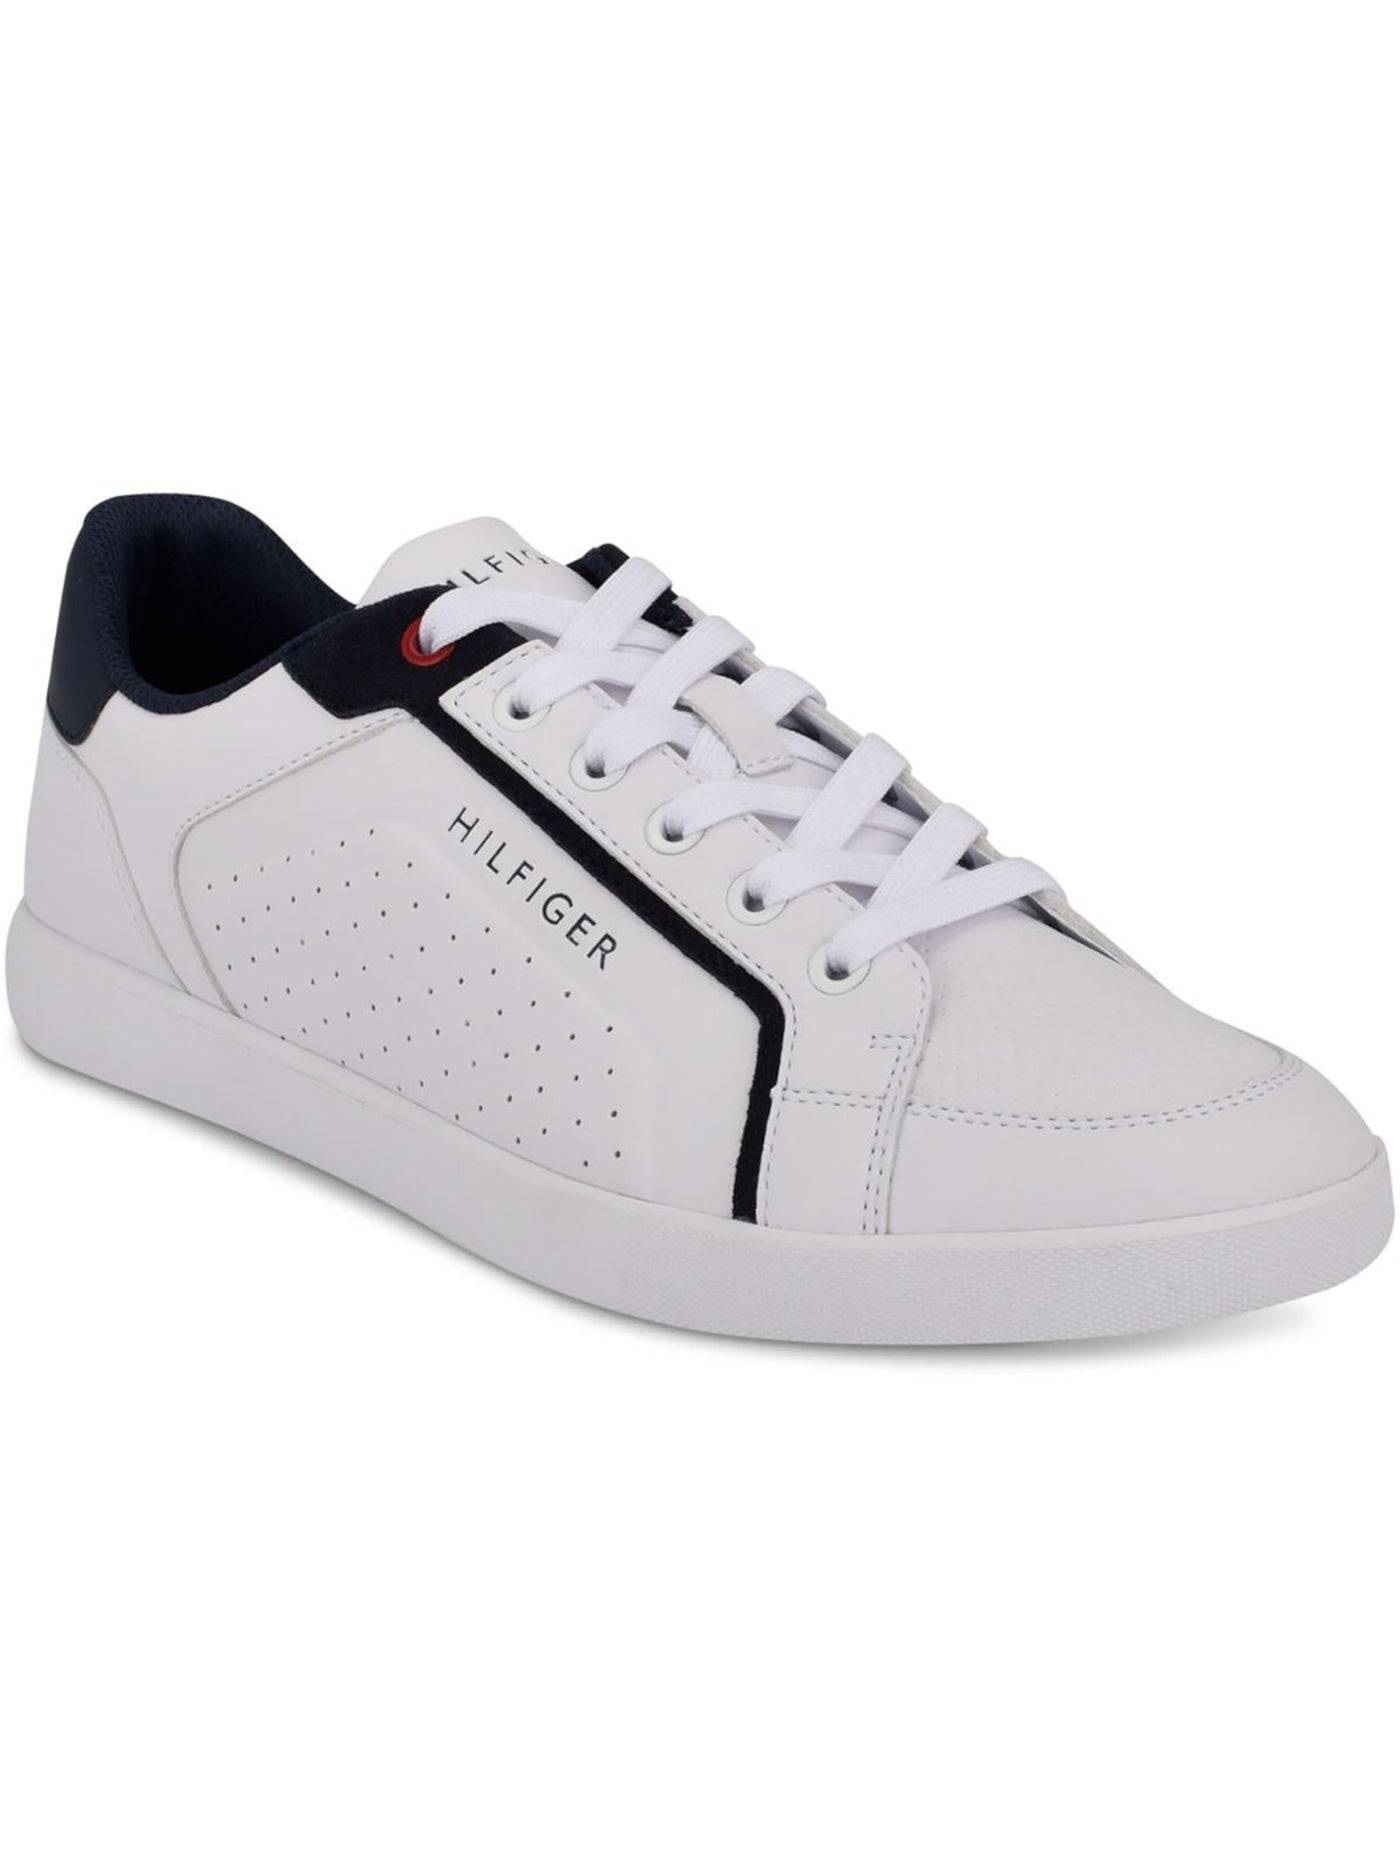 TOMMY HILFIGER Mens White Perforated Cushioned Removable Insole Thumper Round Toe Platform Lace-Up Sneakers Shoes 11